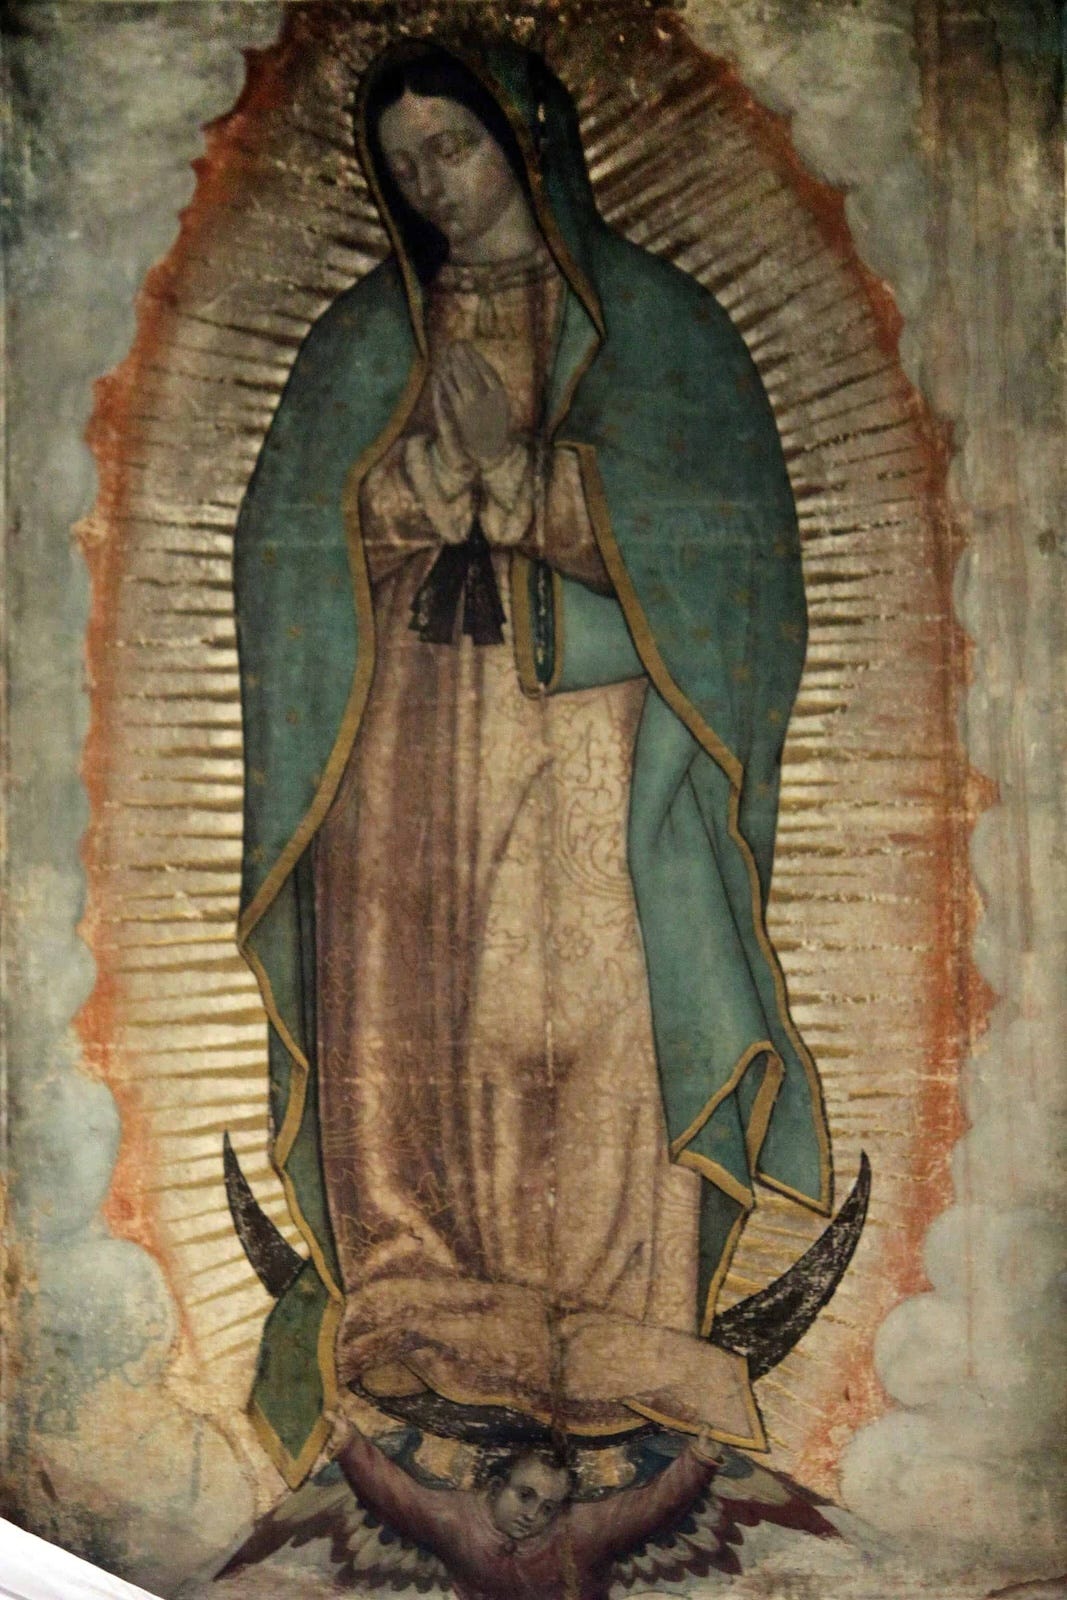 Photograph of the image of Our Lady of Guadalupe